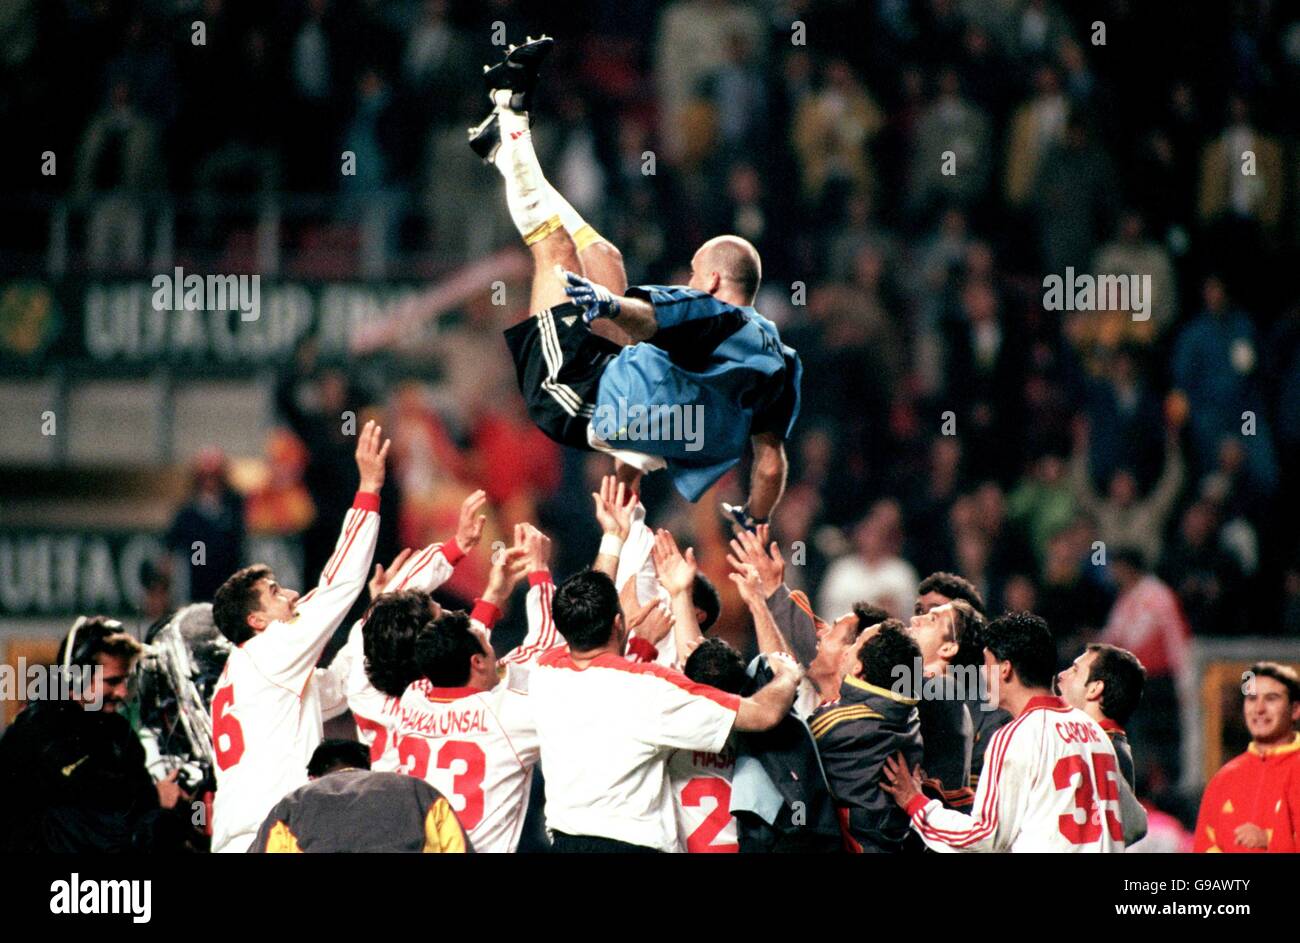 Soccer - UEFA Cup - Final - Galatasaray v Arsenal. Galatasaray goalkeeper Claudio Taffarel is thrown into the air in celebration after their victory Stock Photo